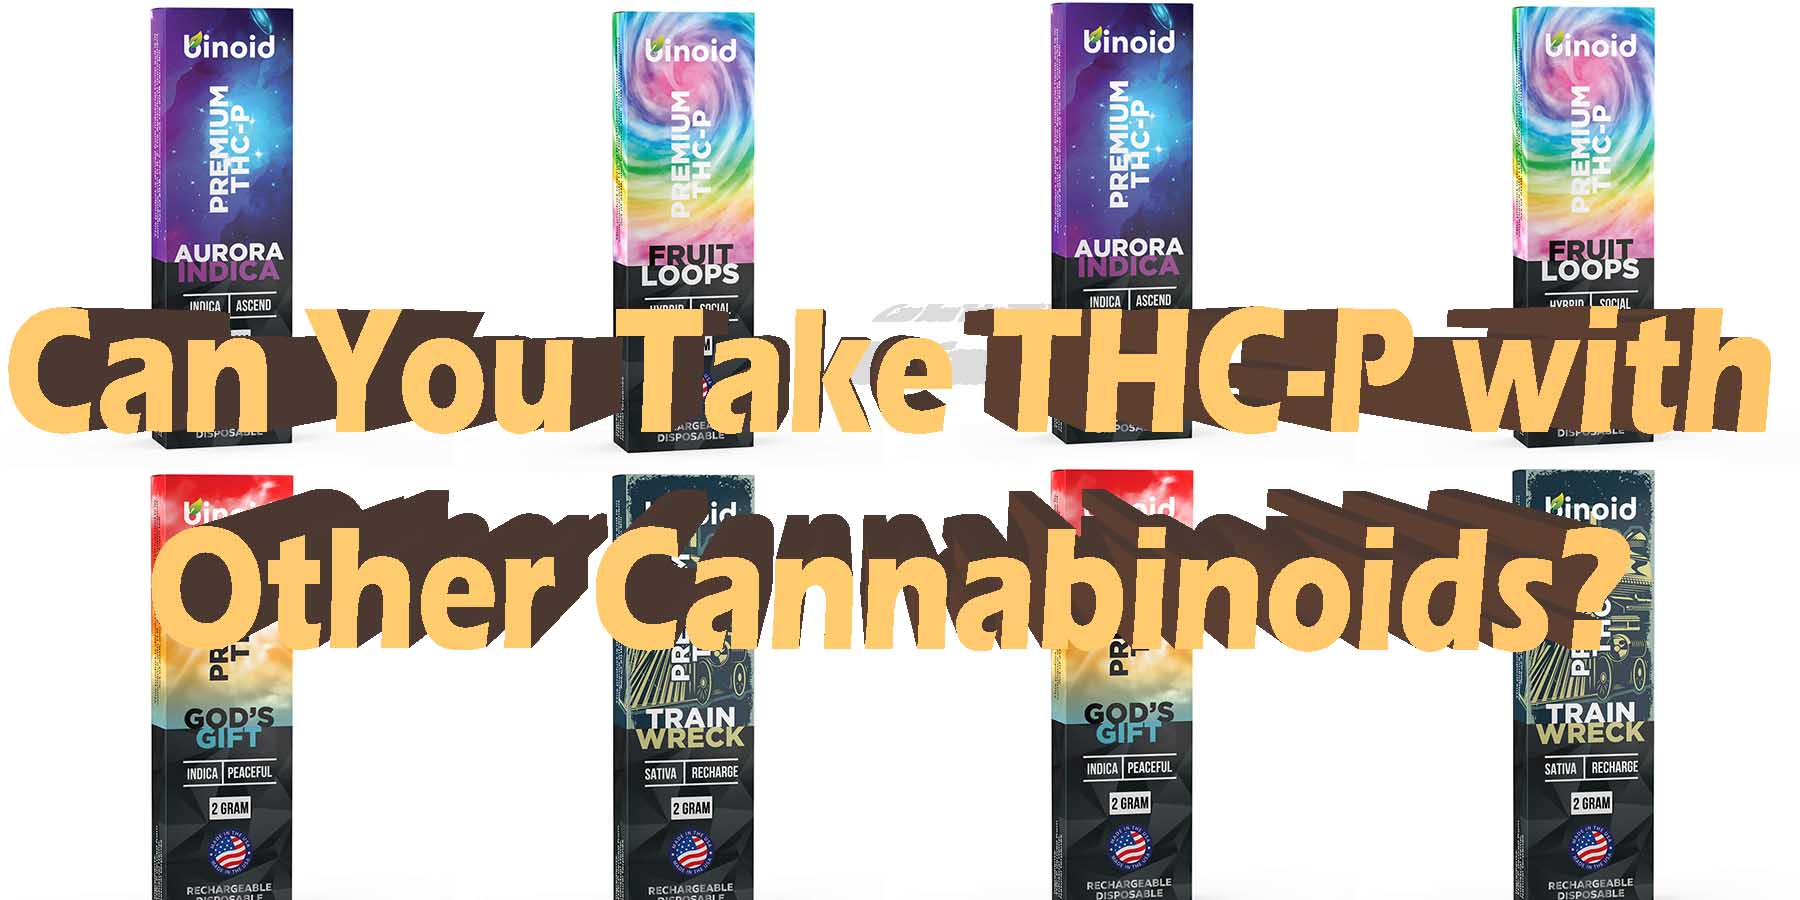 Can You Take THC-P with Other Cannabinoids WhereToGet HowToGetNearMe BestPlace LowestPrice Coupon Discount For Smoking Best High Smoke Shop Online Near Me Binoid